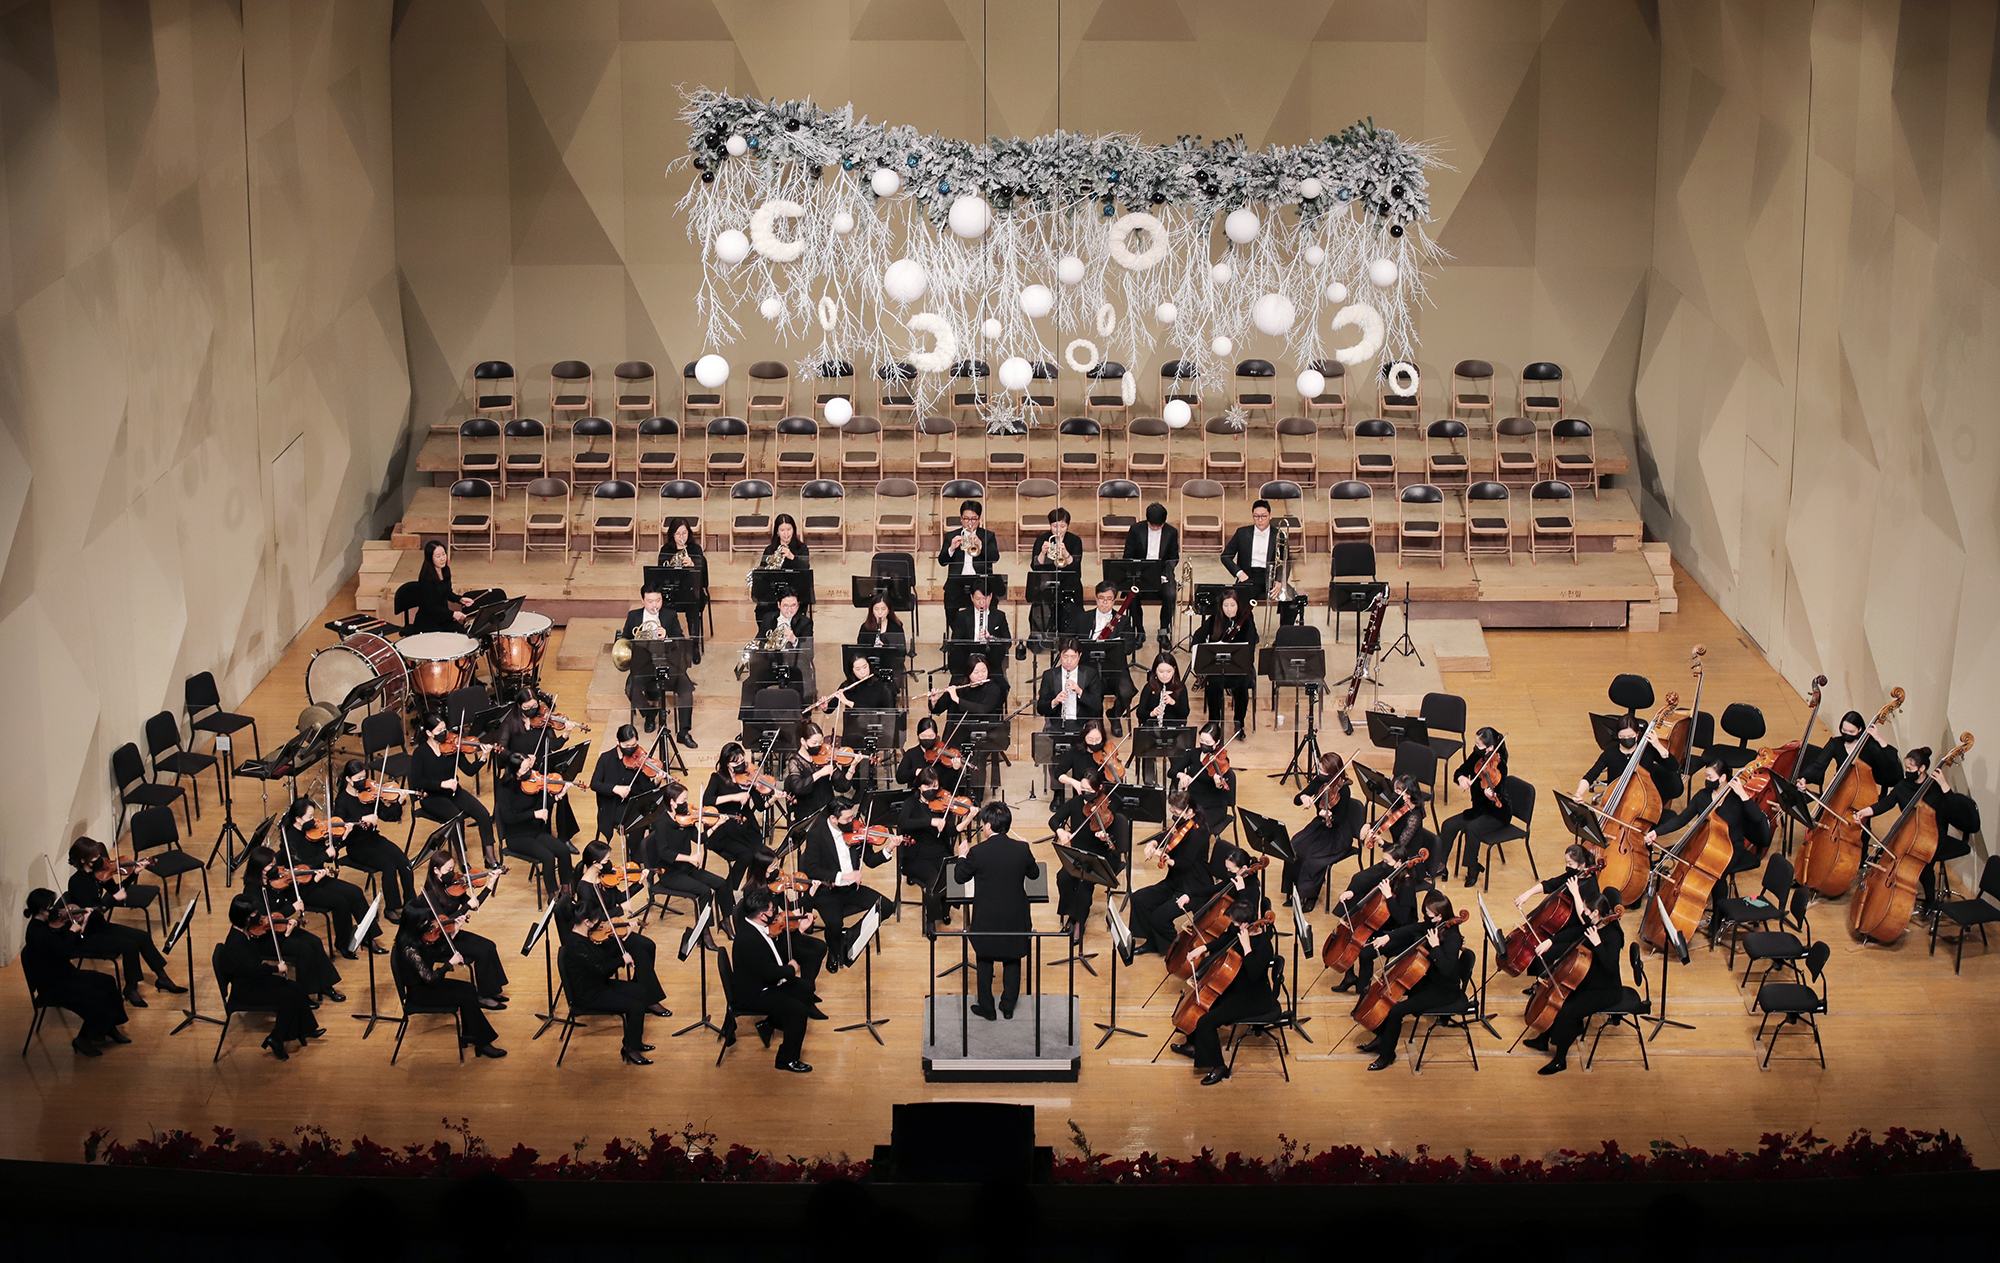 [12.23]Bucheon Philharmonic Orchestra 284th Subscription Concert - Beethoven, Choral